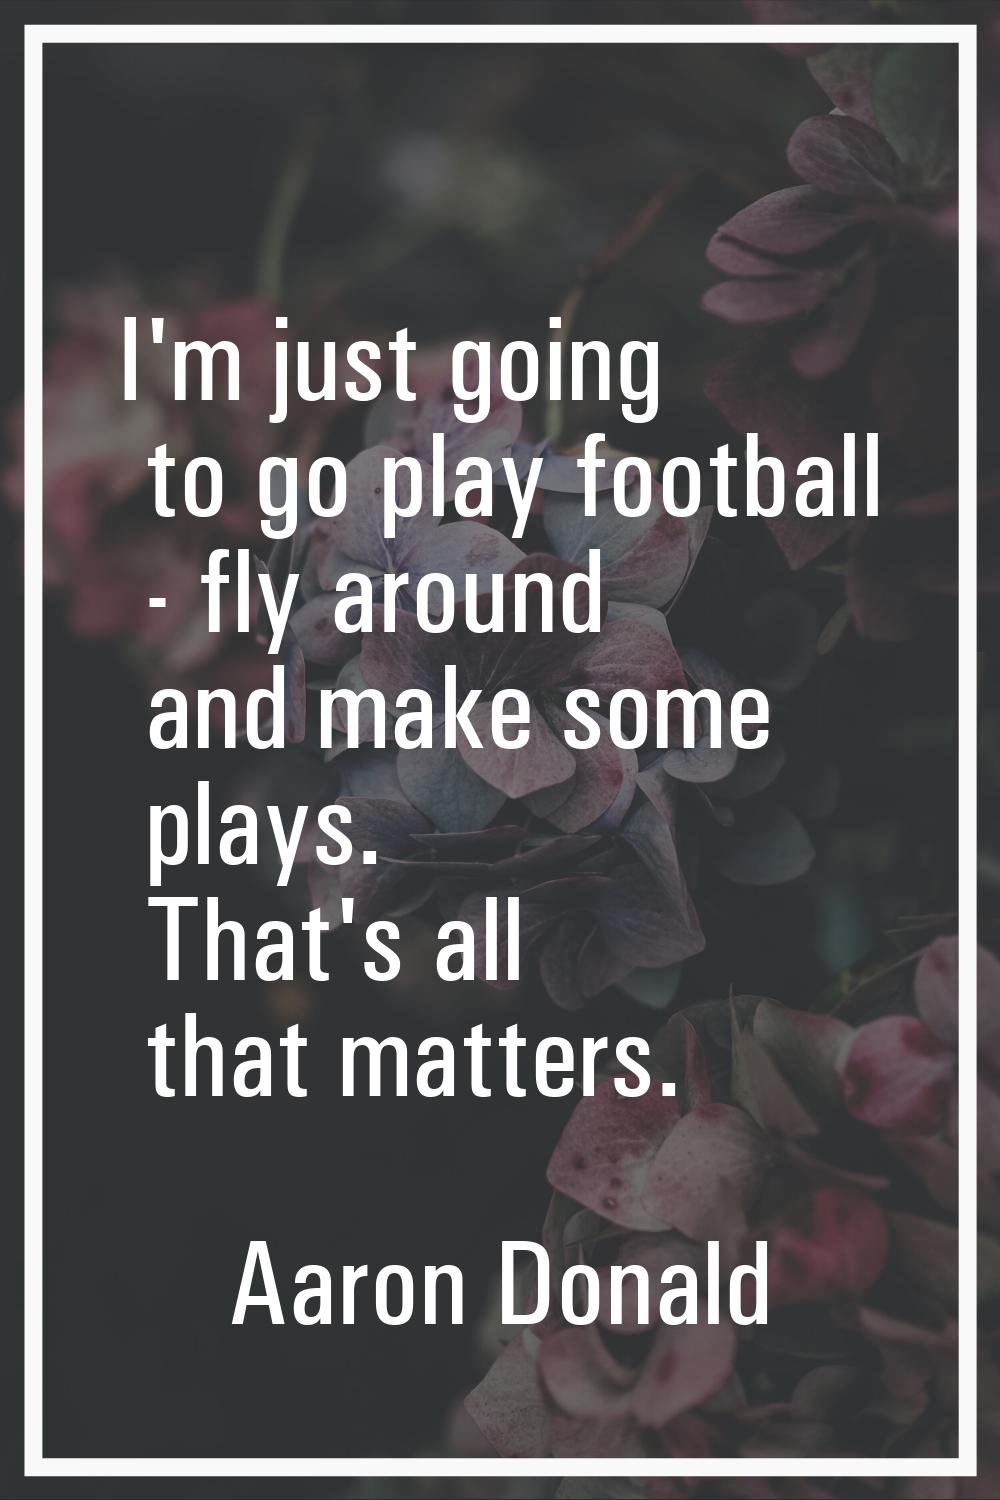 I'm just going to go play football - fly around and make some plays. That's all that matters.